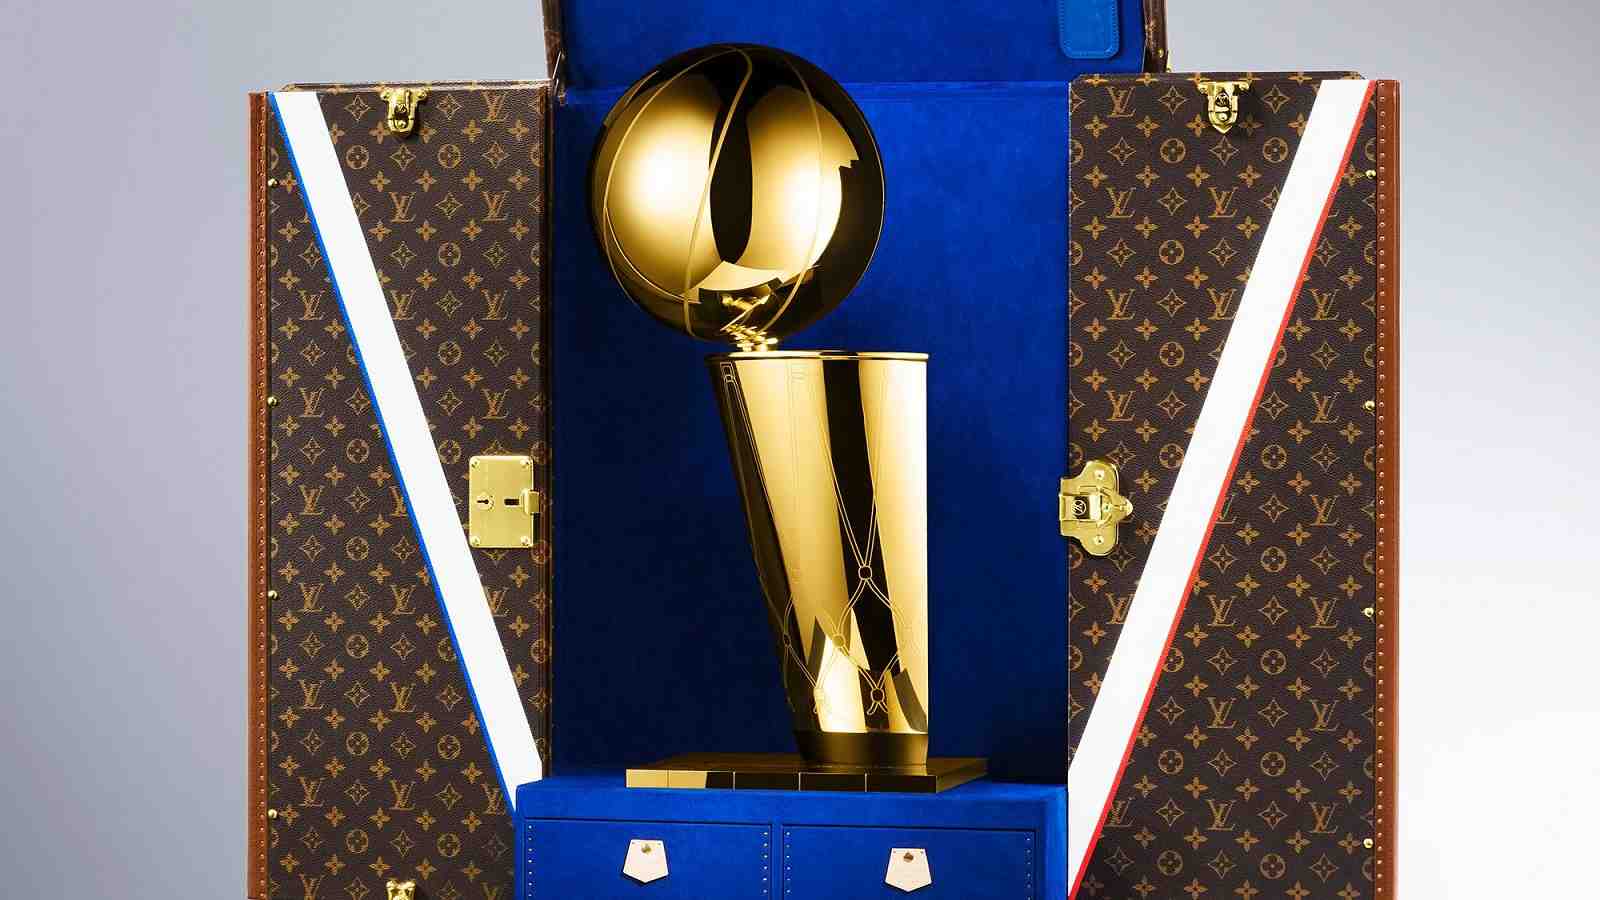 LOUIS VUITTON, AN EXCLUSIVE PARTNERSHIP AGREEMENT WITH THE NBA